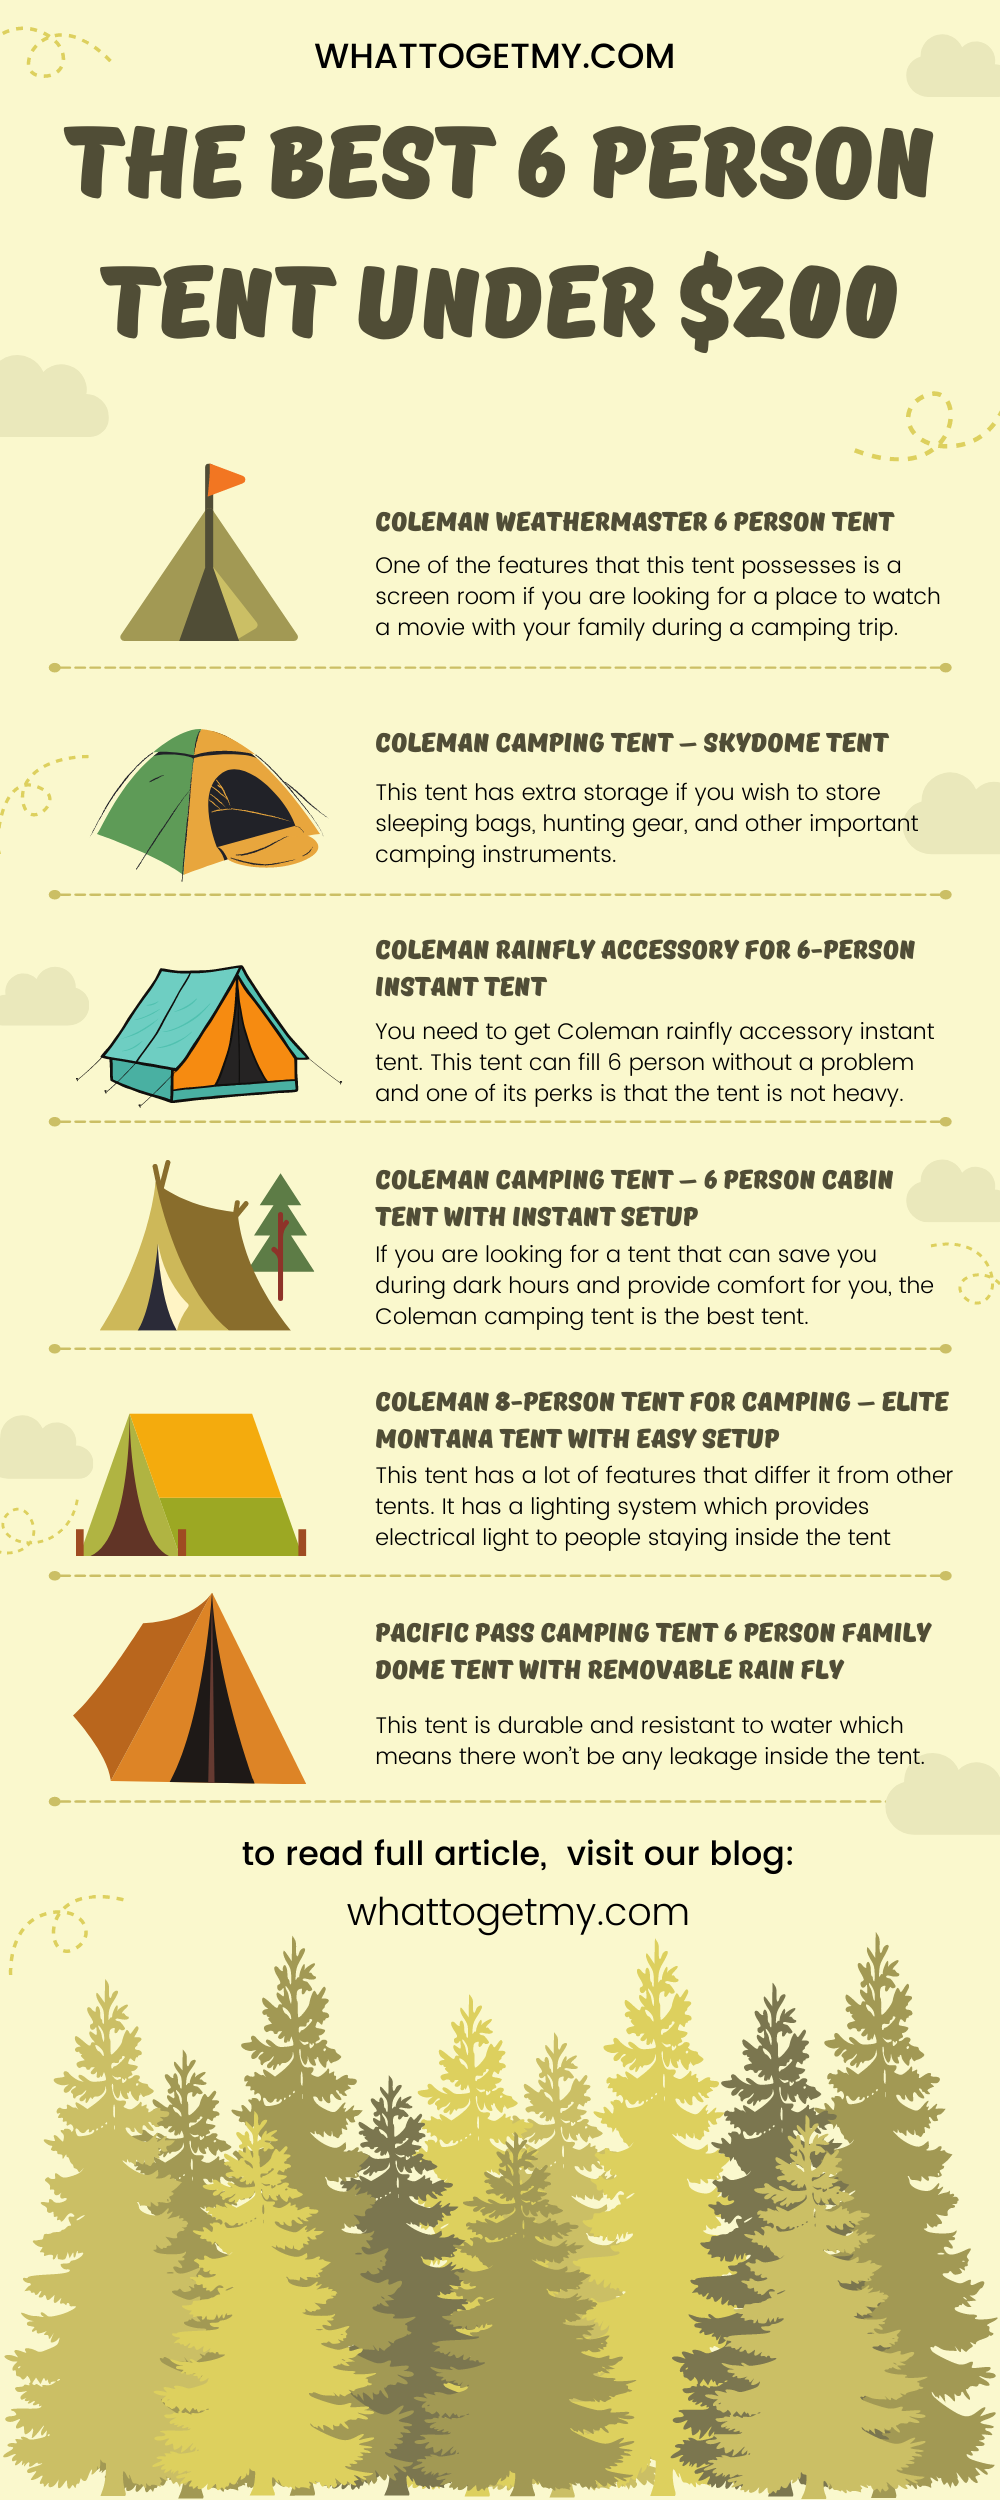 The best 6 person tent under 200